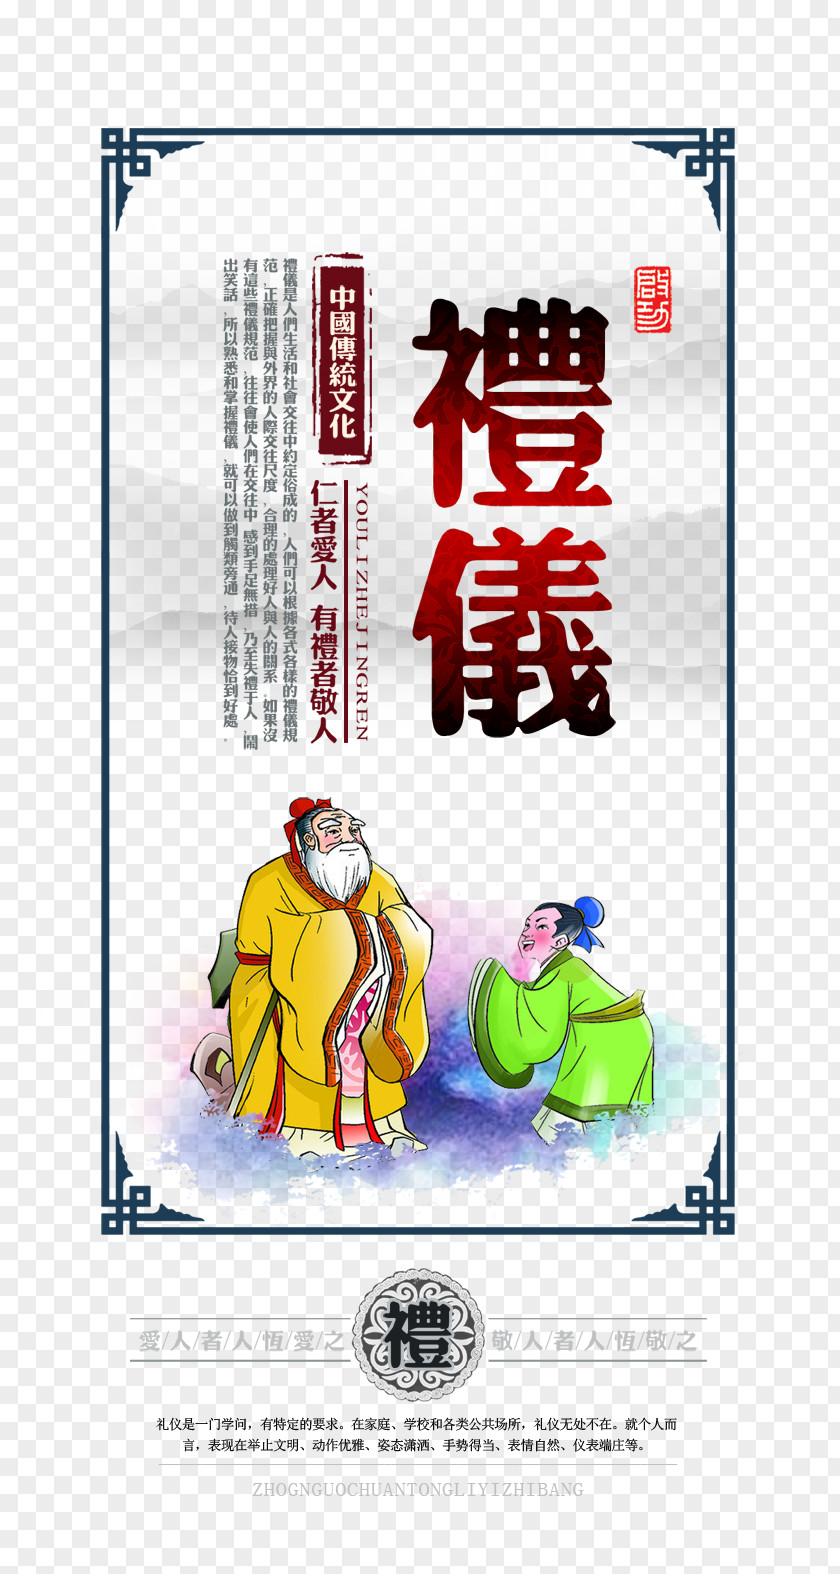 Moral Etiquette China Certification Industry Poster PNG